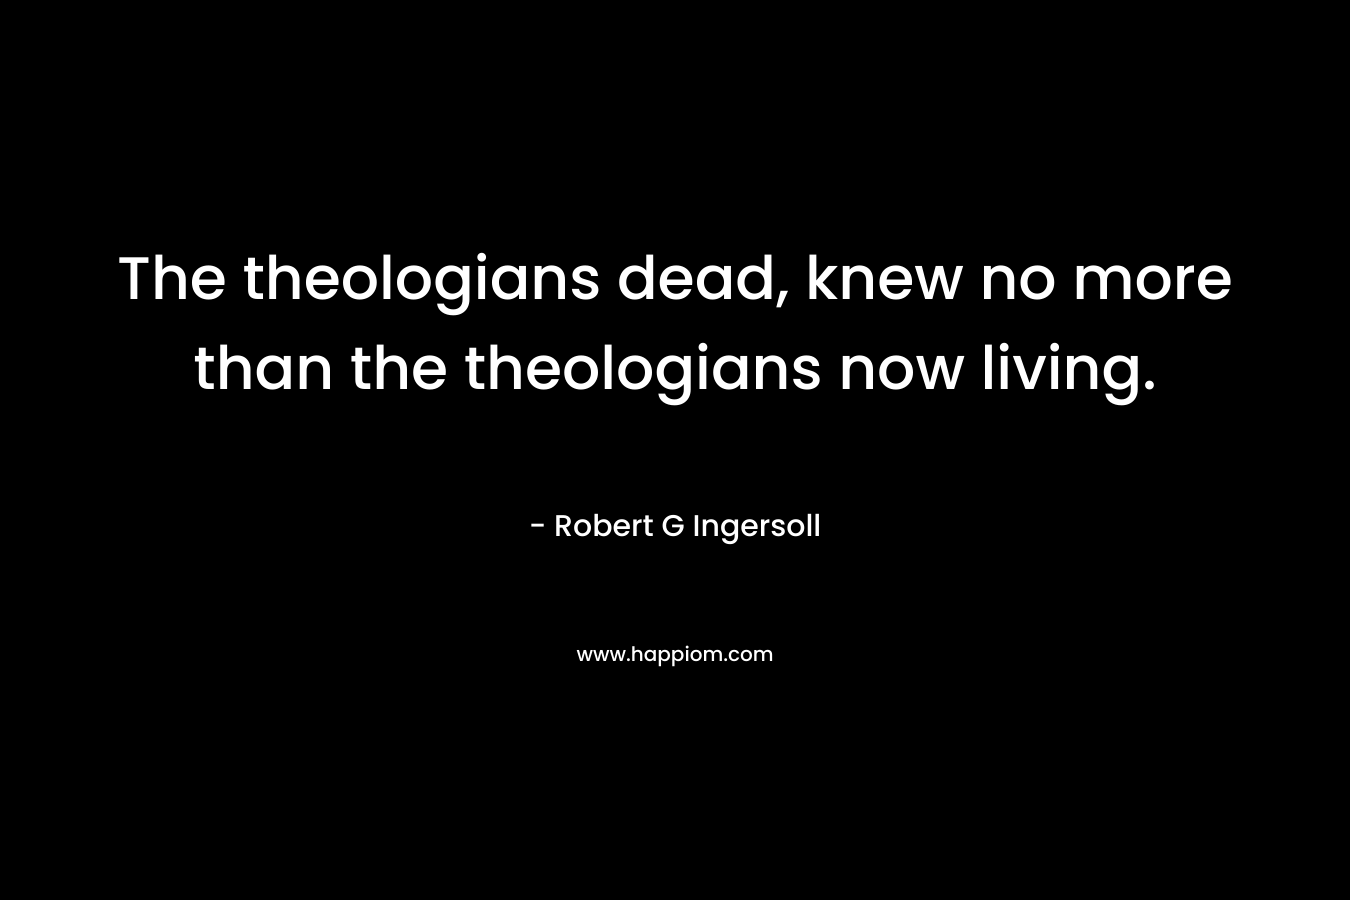 The theologians dead, knew no more than the theologians now living. – Robert G Ingersoll